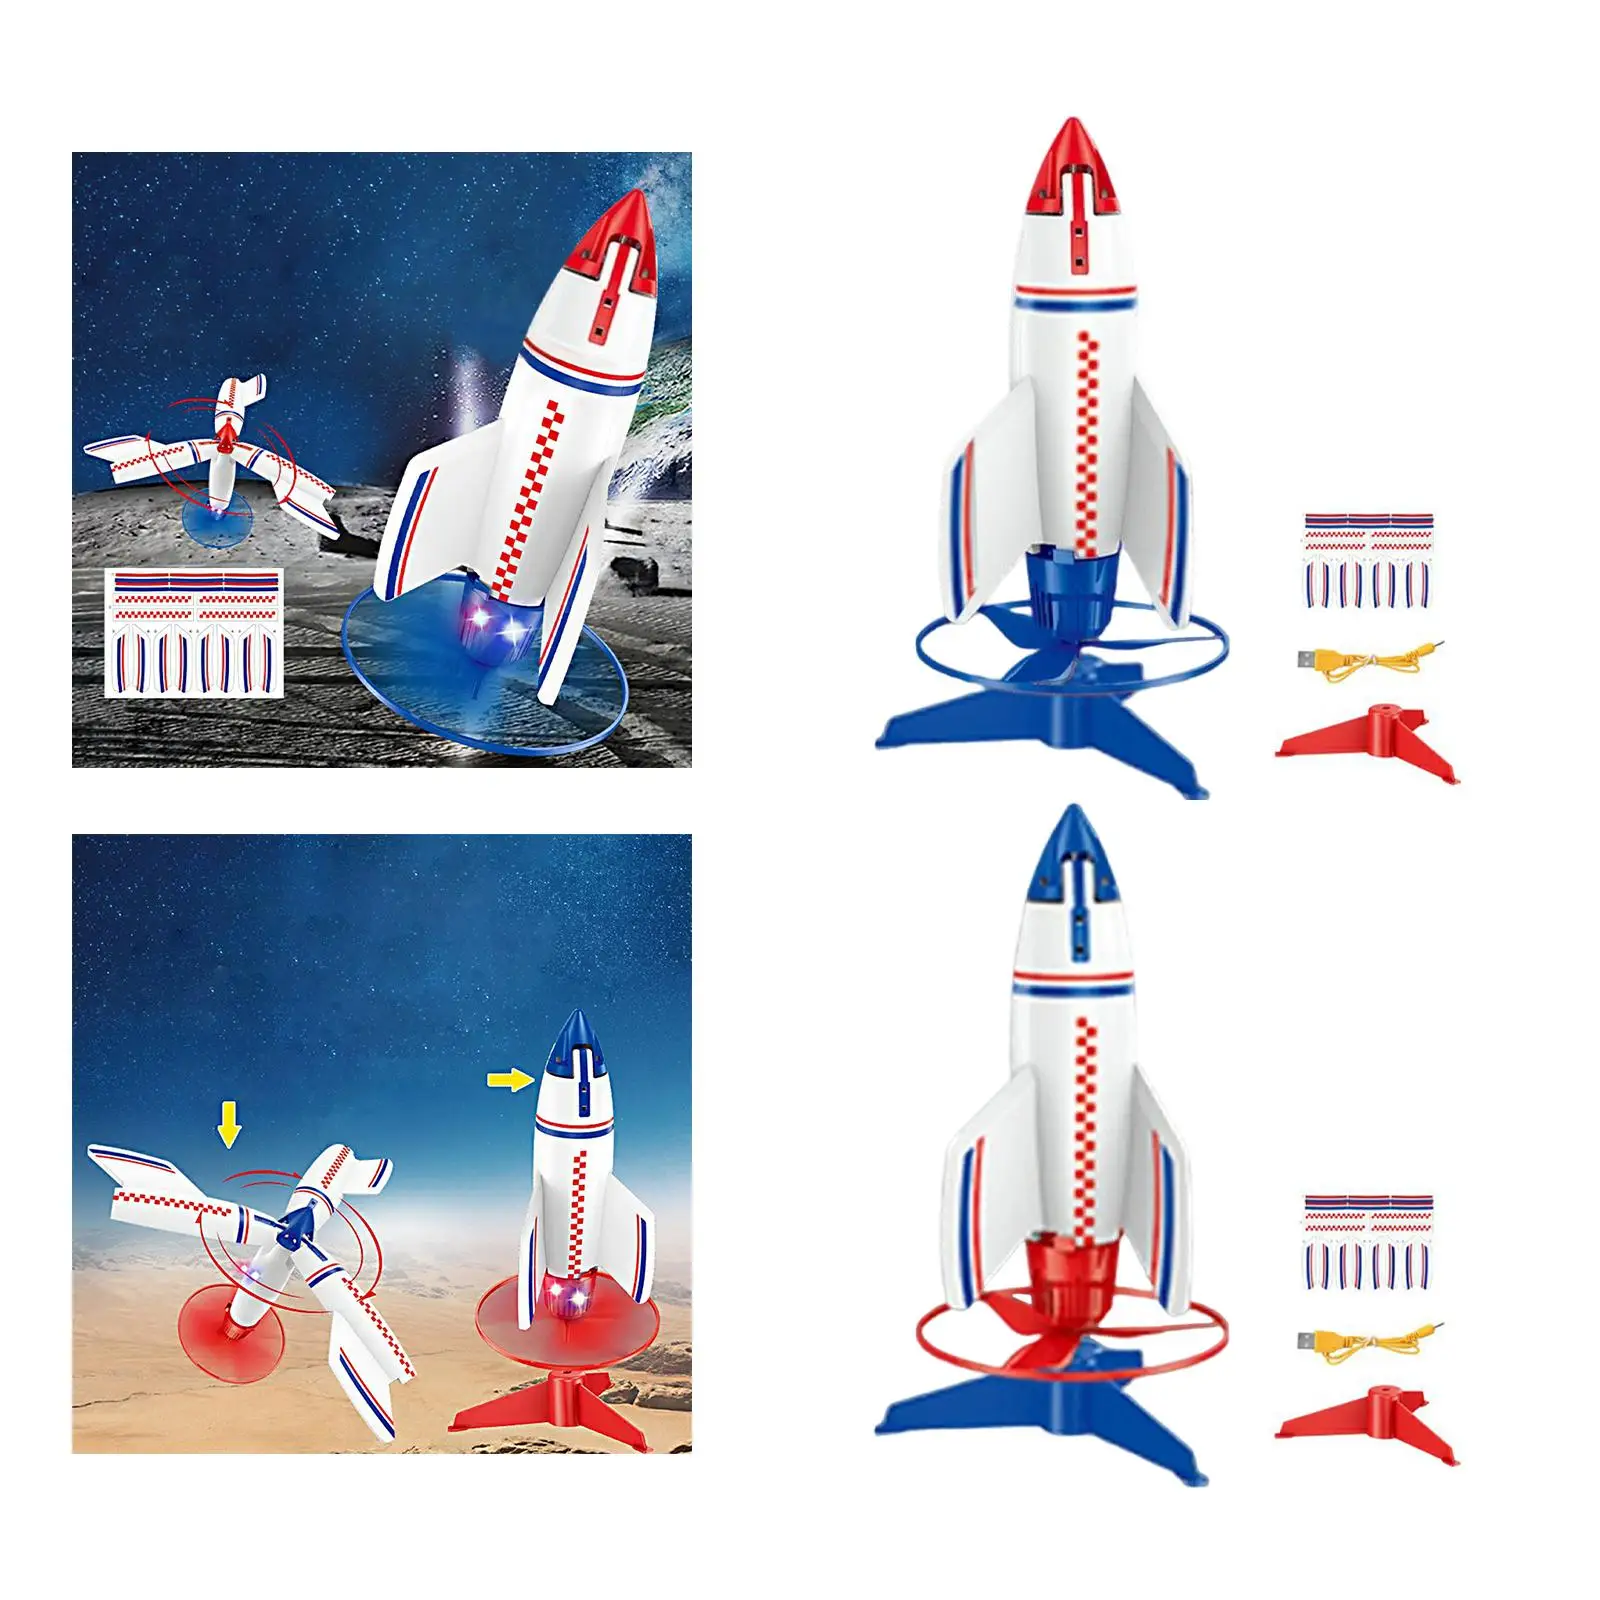 Rocket Launcher for Kids with Light Foam Rockets for boys Toddlers